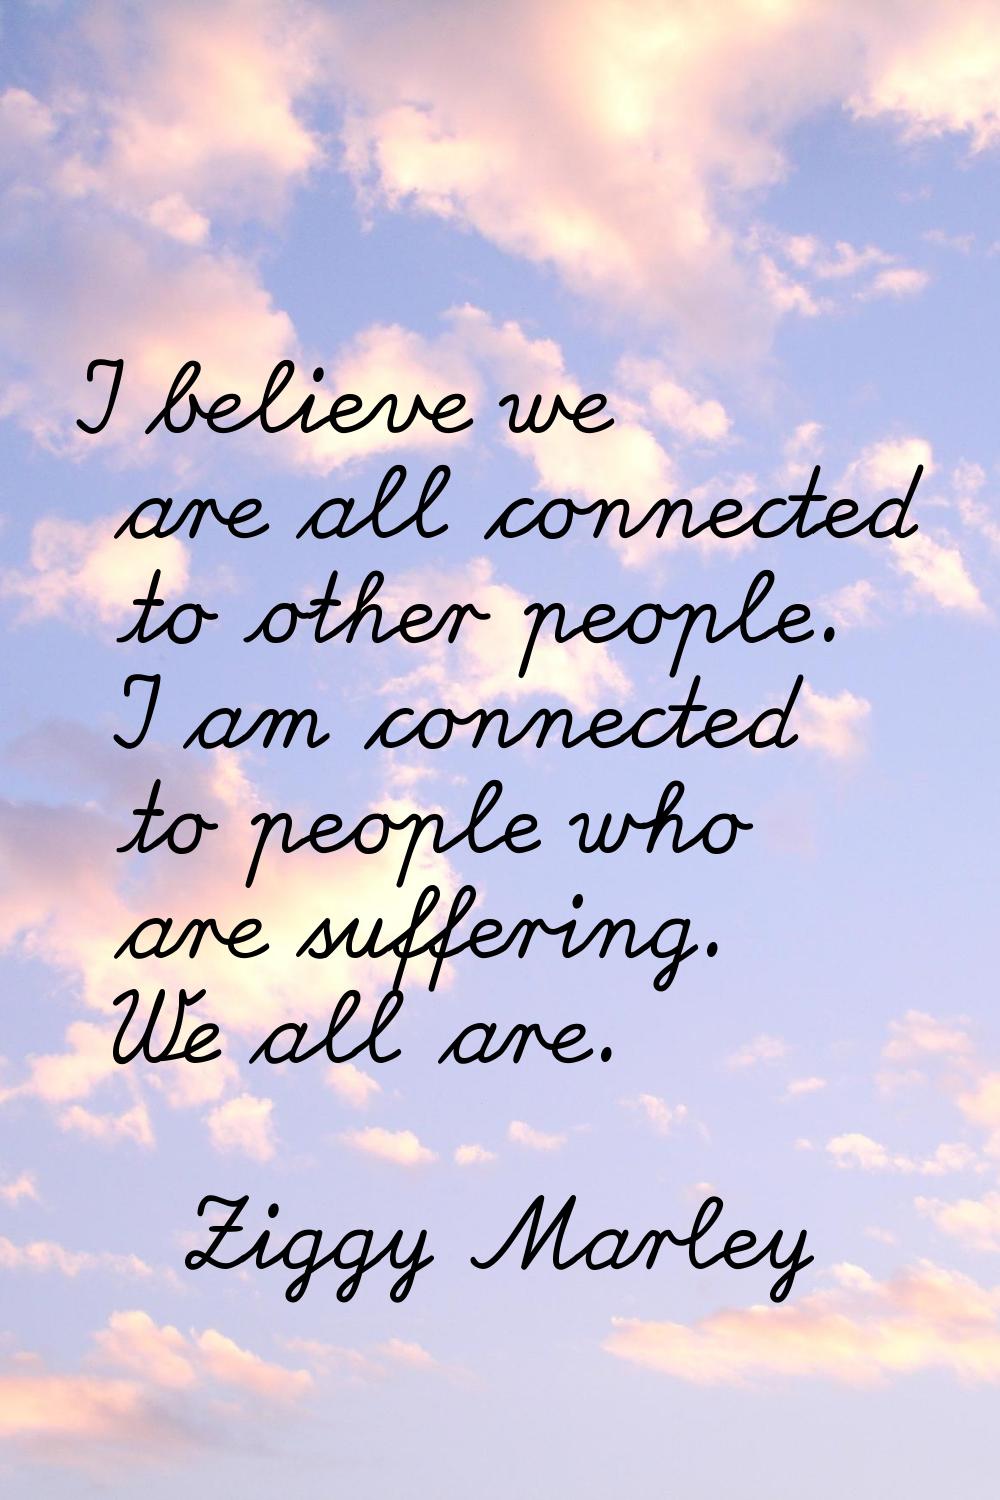 I believe we are all connected to other people. I am connected to people who are suffering. We all 